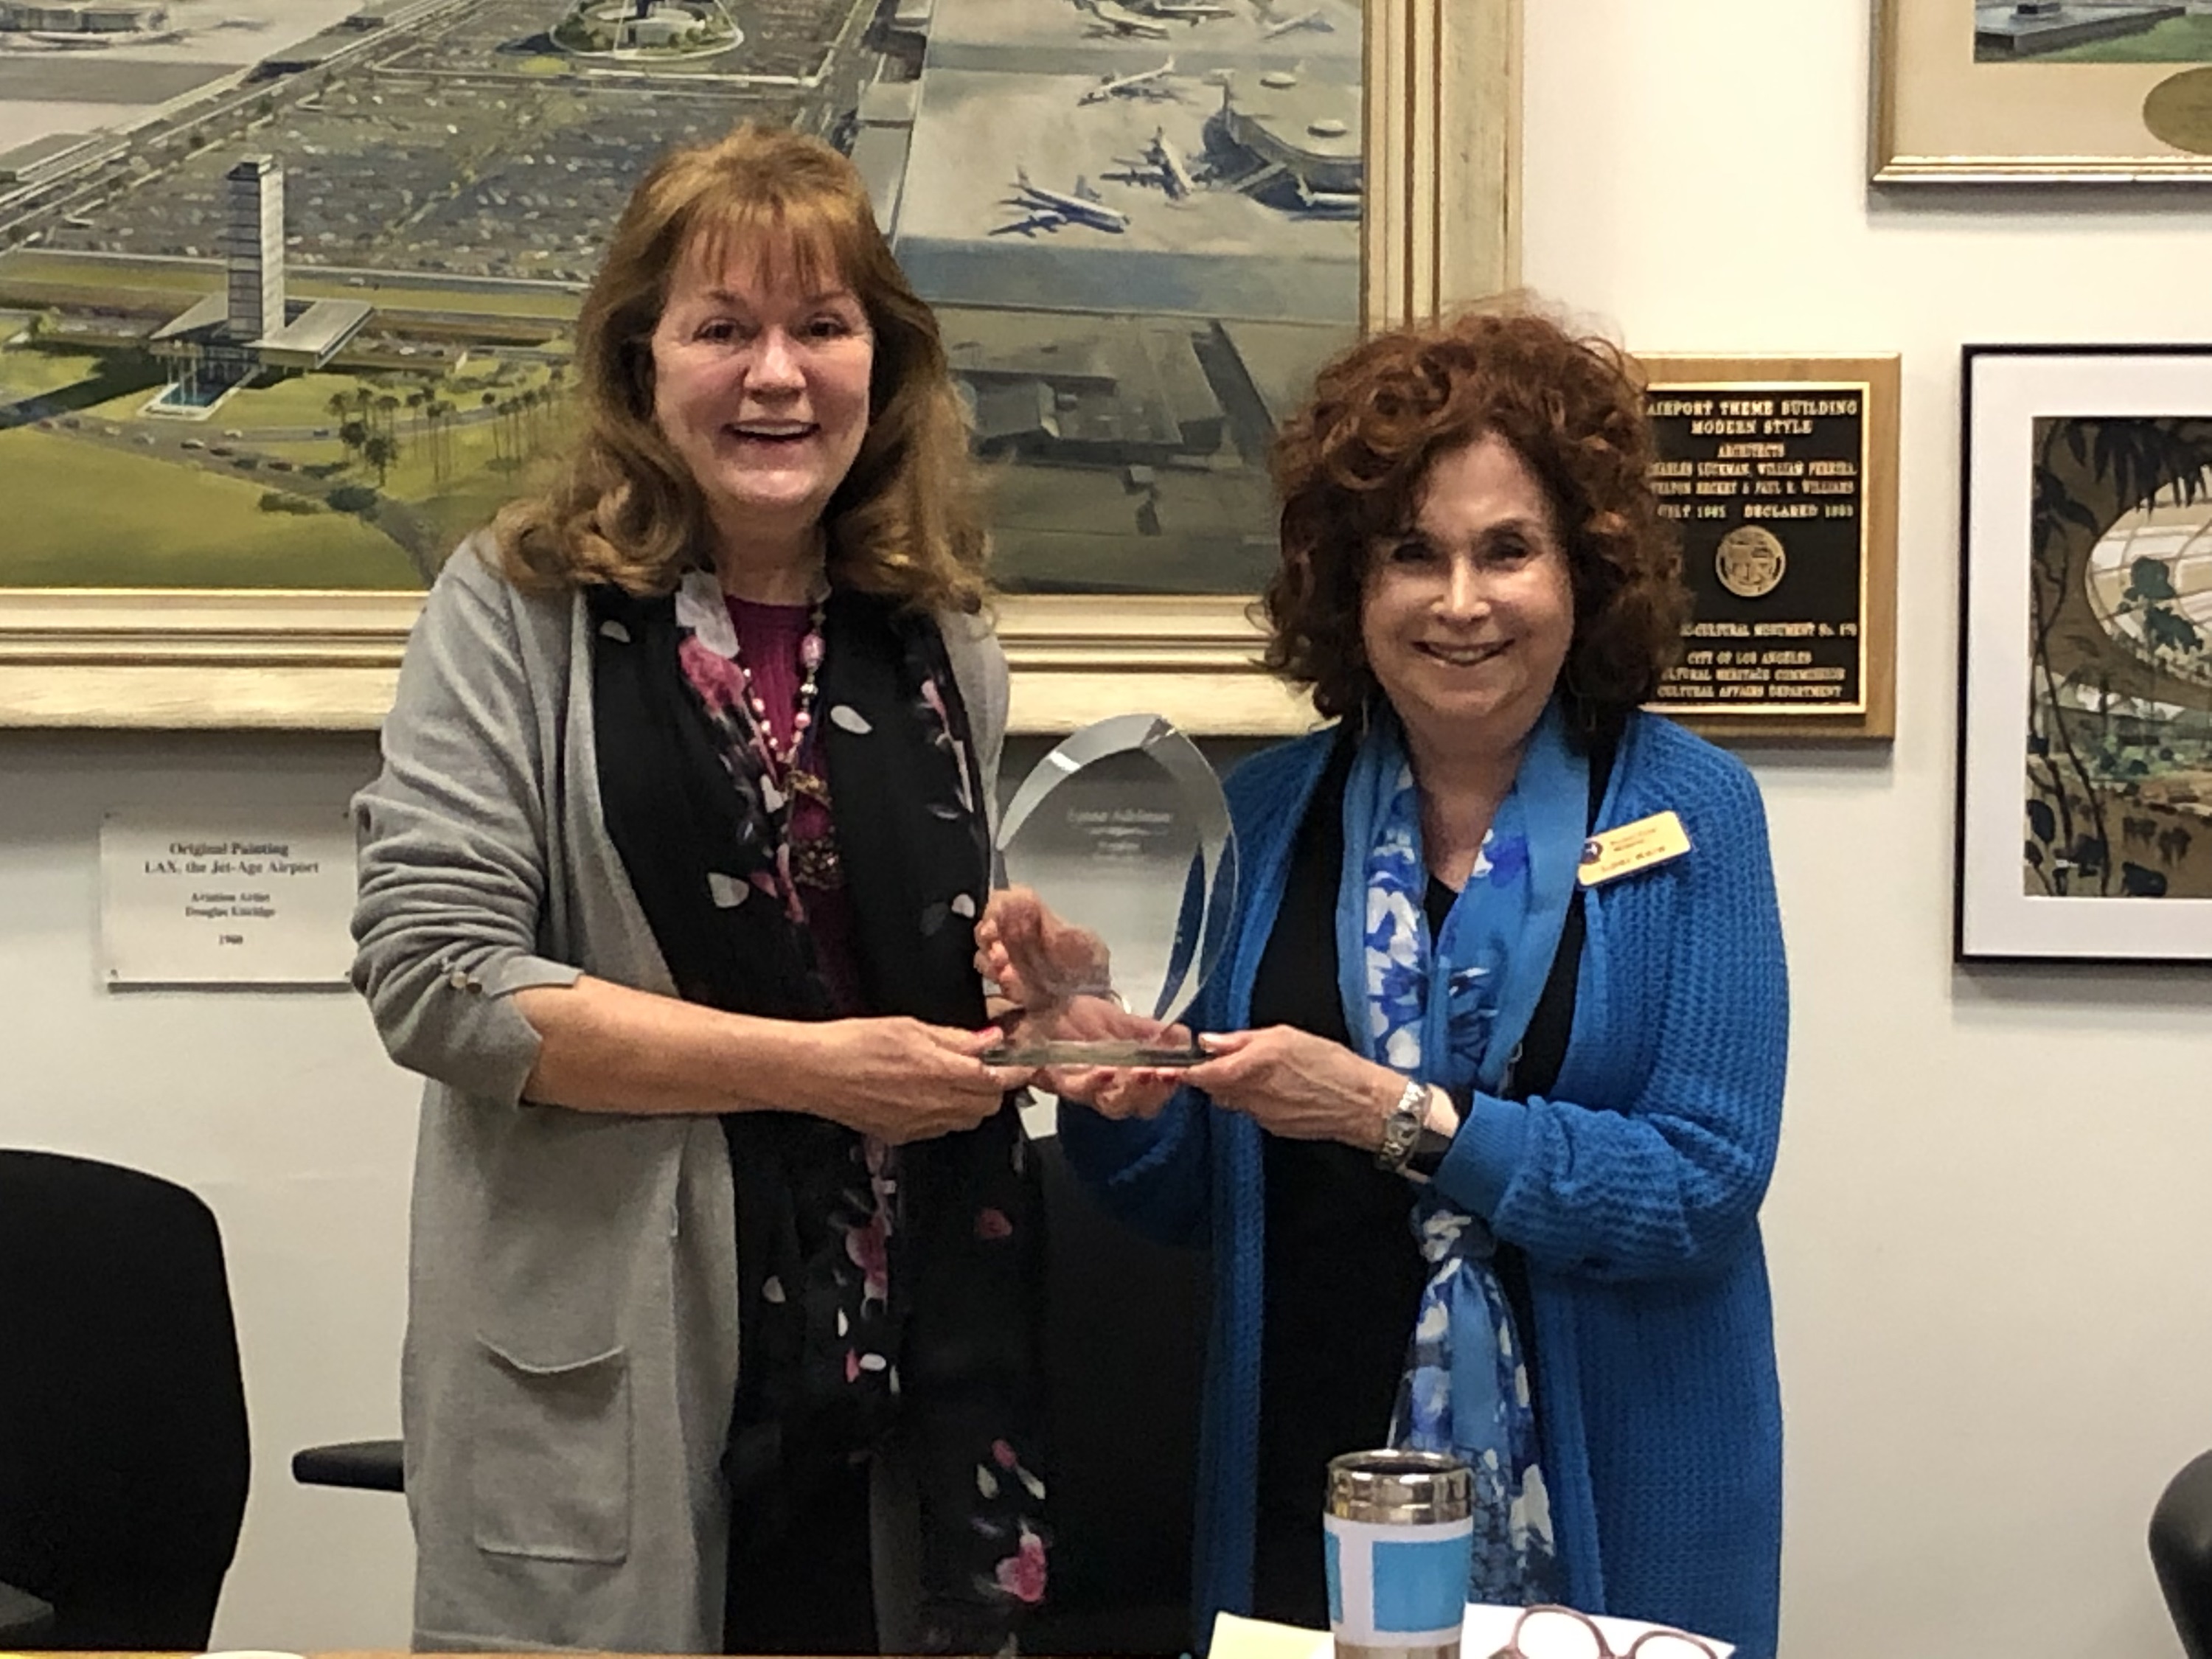 Outgoing President Lynne Adelman received plaque from VP Lori Keir